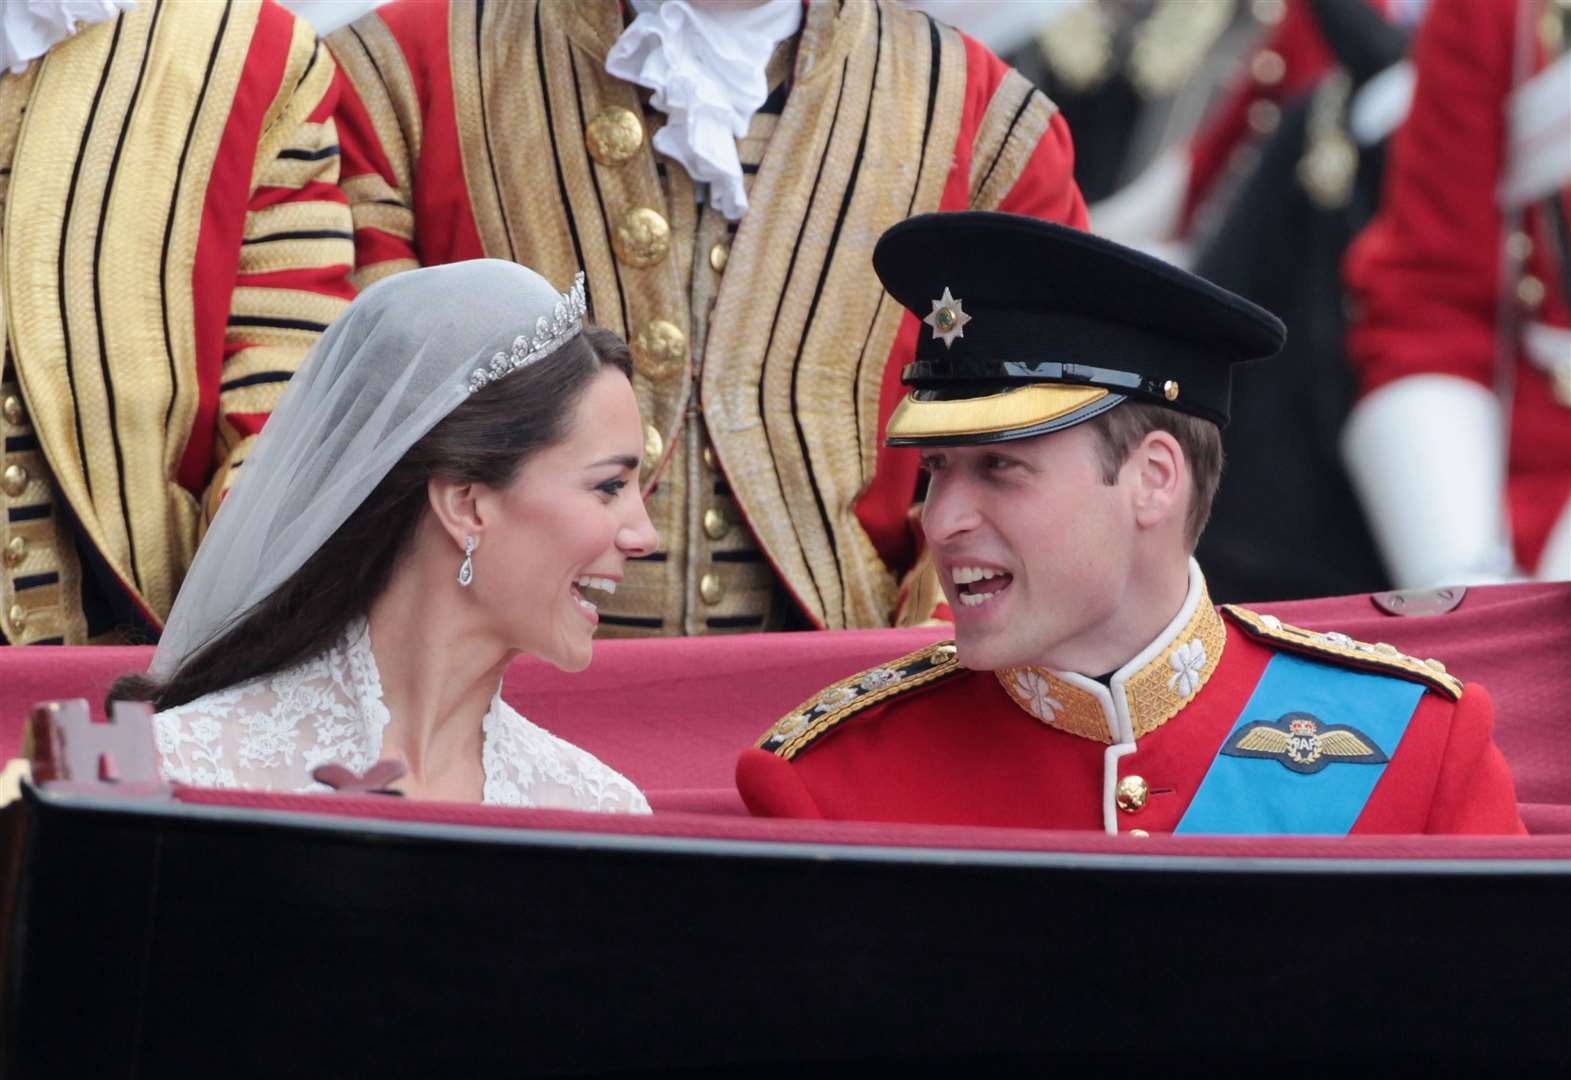 Newlywed William and Kate in the carriage procession after their wedding at Westminster Abbey (Matt Cardy/PA)